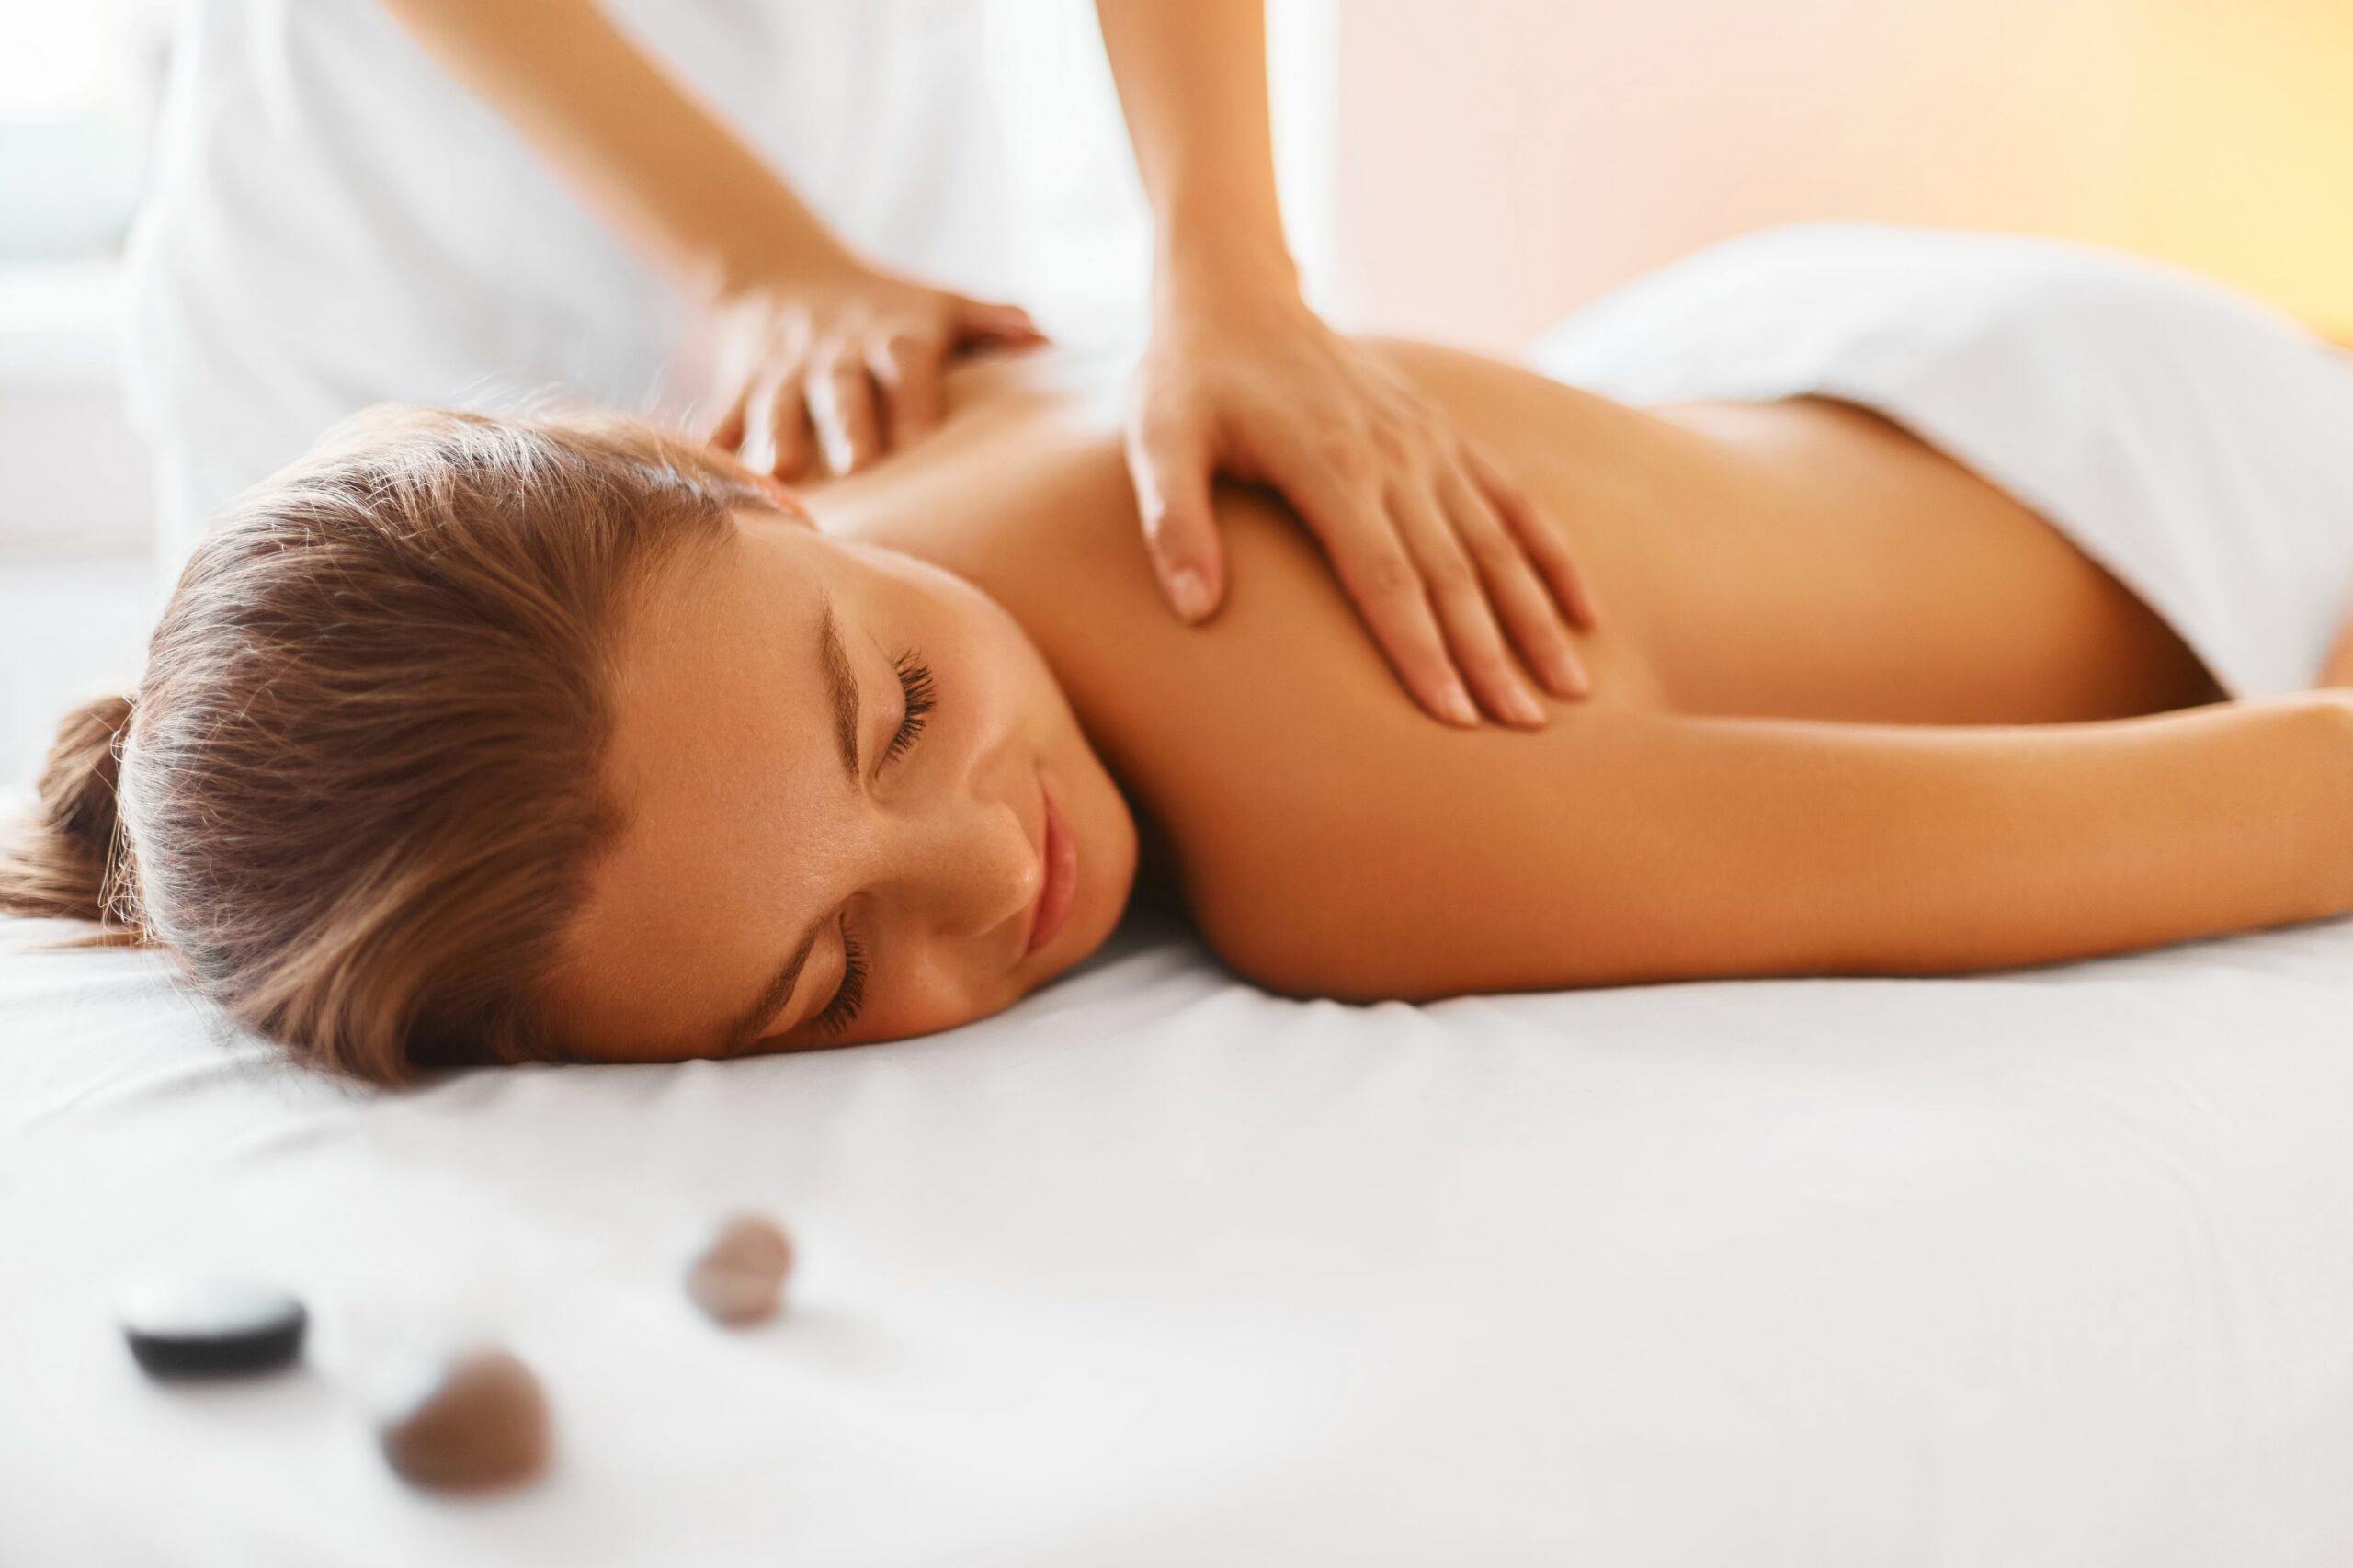 THE BENEFITS OF AND HOW TO GIVE AN INTIMATE MASSAGE